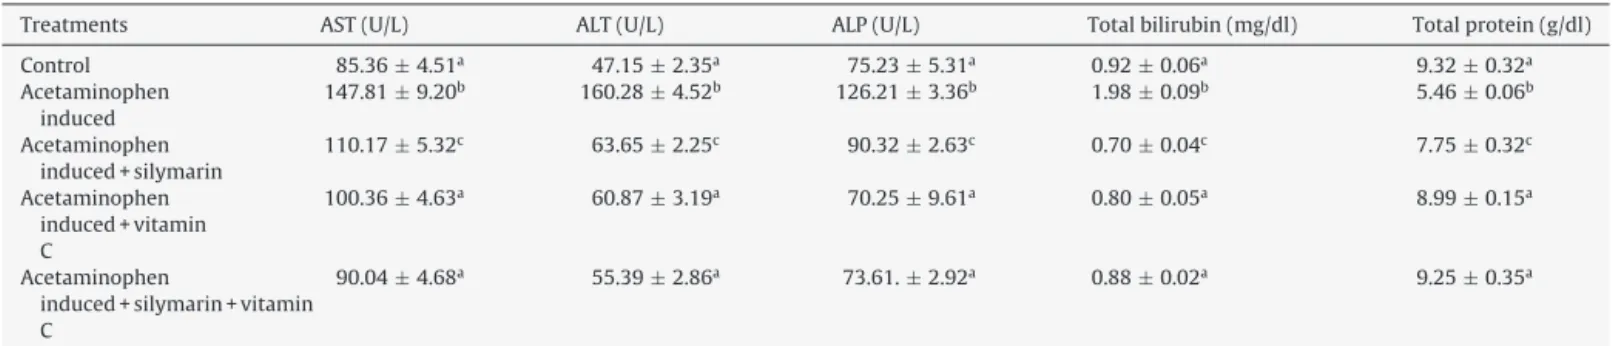 Table 1 shows the effects of silymarin and vitamin C on the activities of serum ALP, ALT, AST as well as concentrations of total bilirubin and total protein in the experimental rats